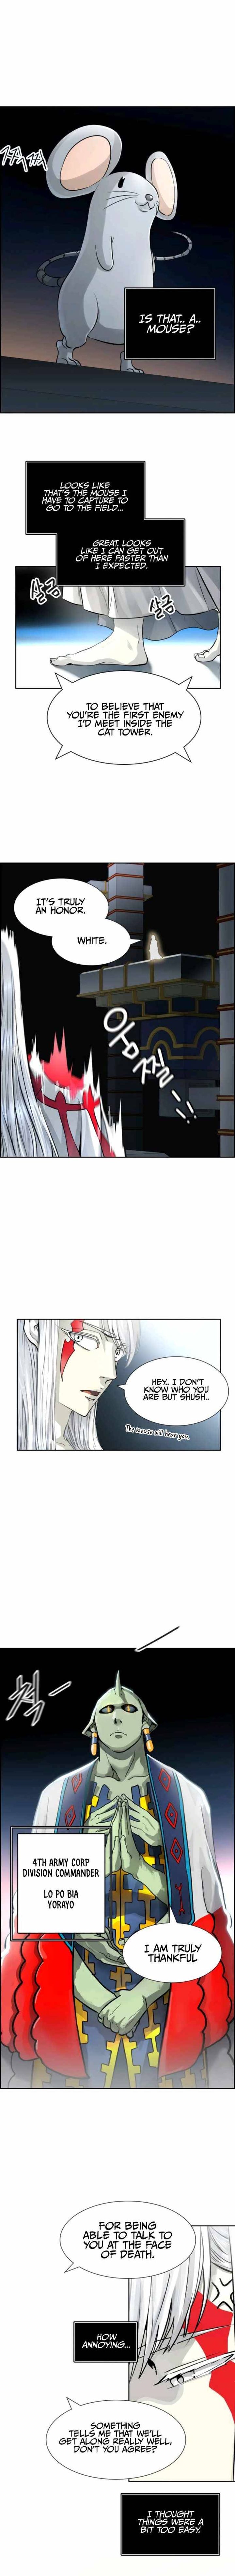 Tower Of God 487 16